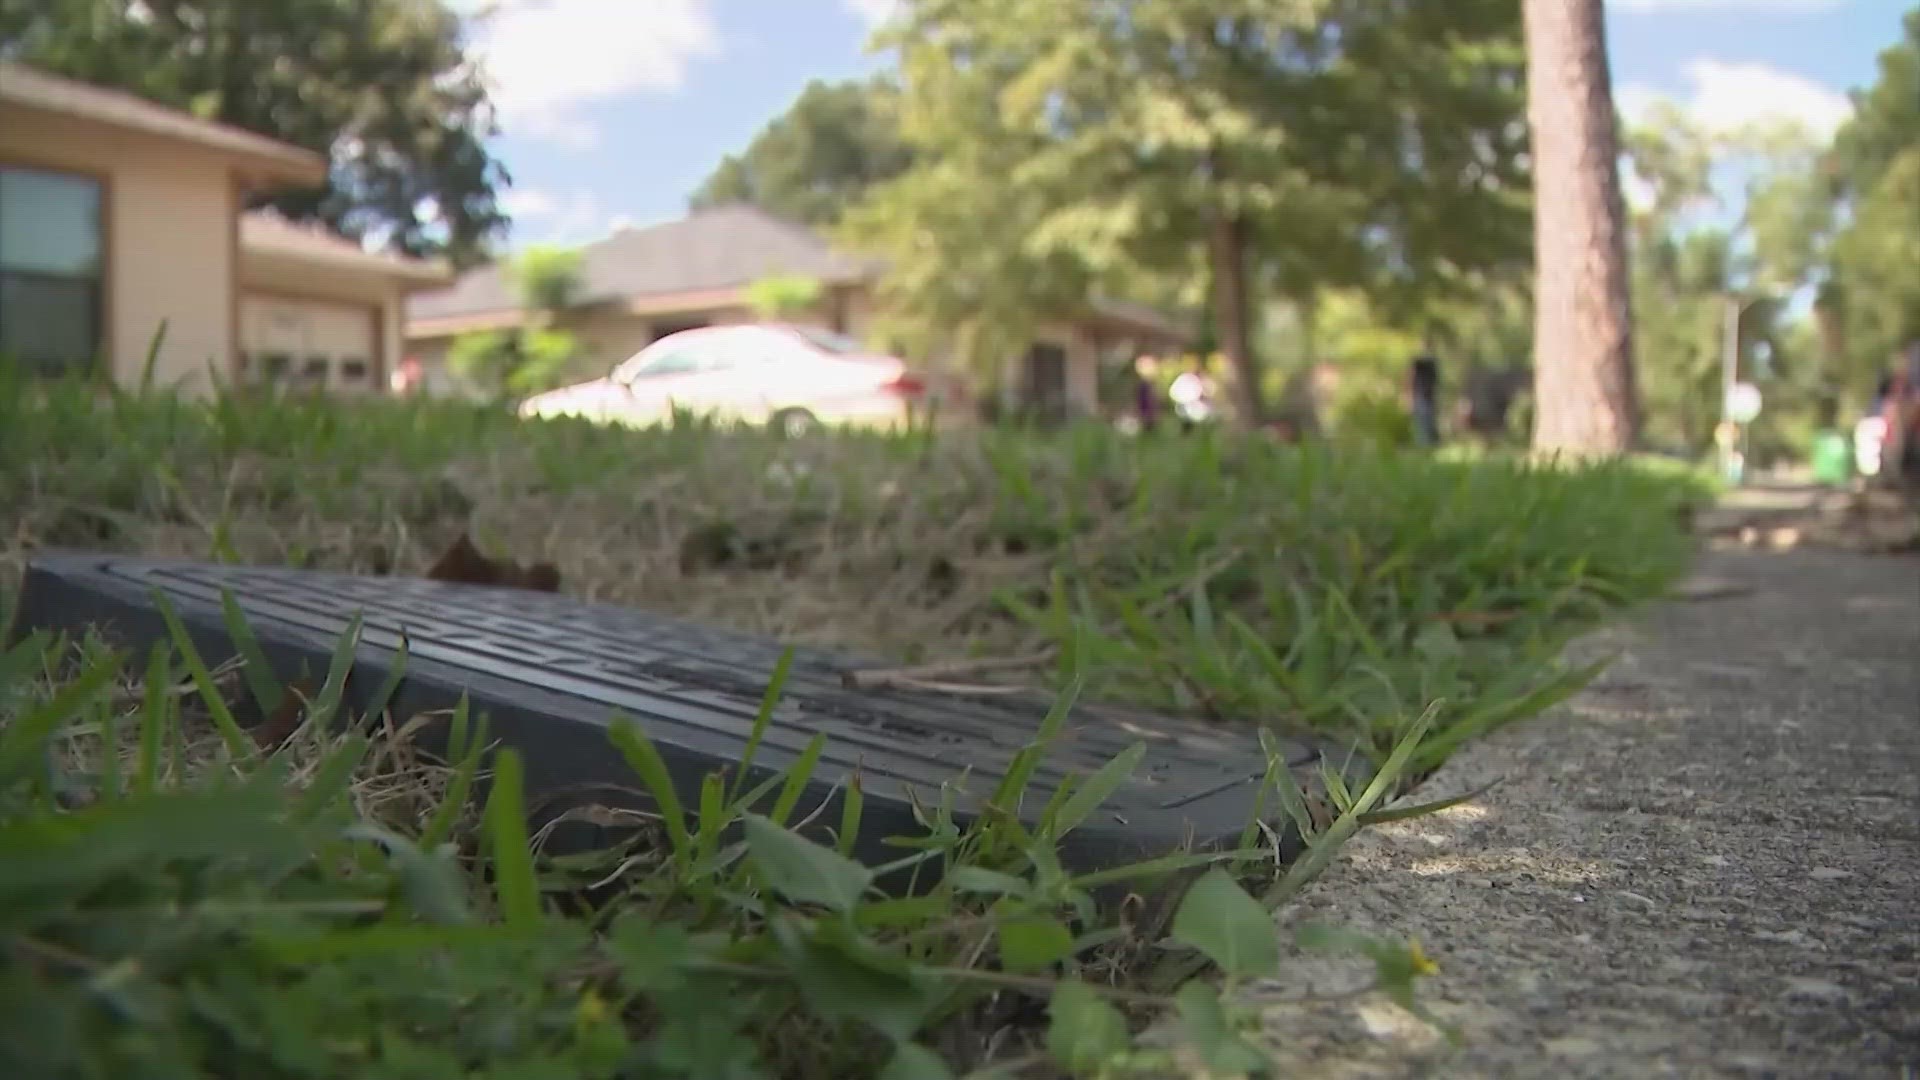 Over the past year, KHOU 11 has reported on multiple instances of City of Houston customers receiving very high water bills. Some ranged in the thousands of dollars.